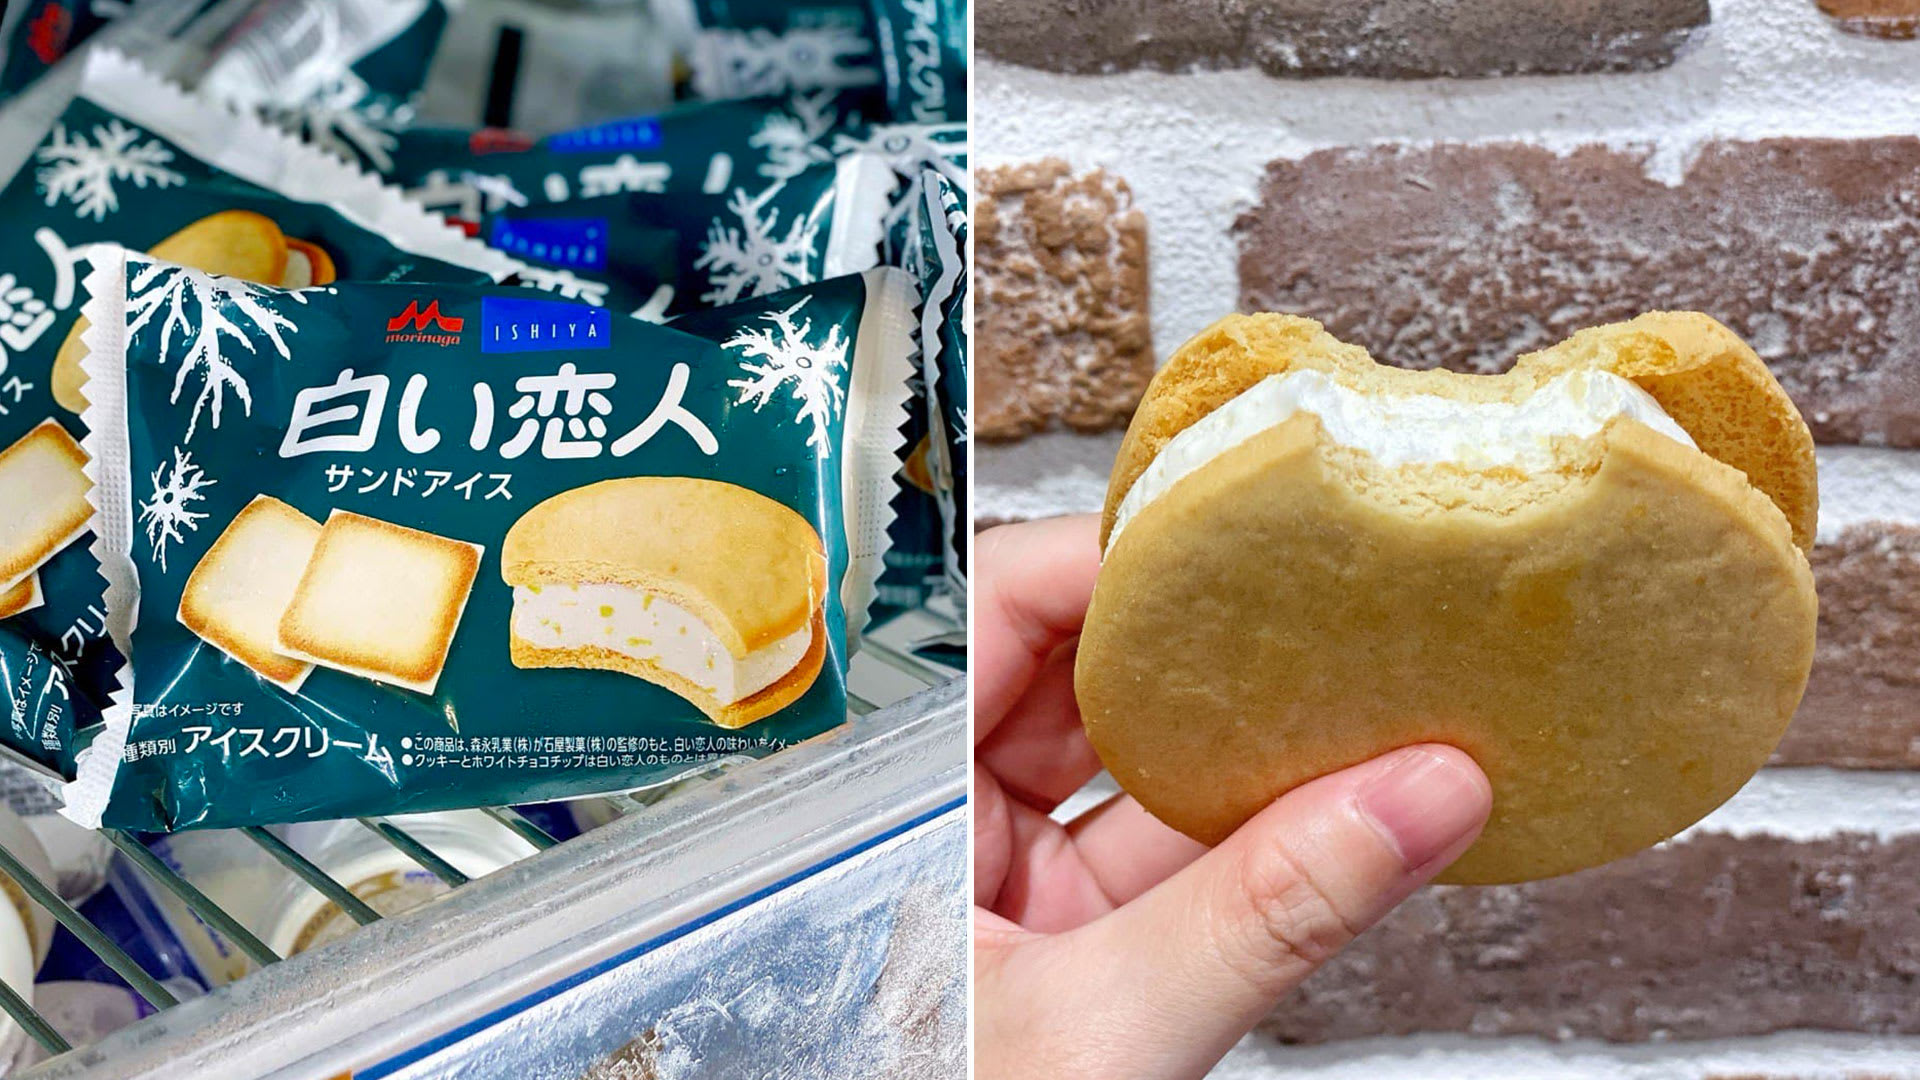 Shiroi Koibito Limited-Edition Ice Cream Sandwich Now Available In S’pore